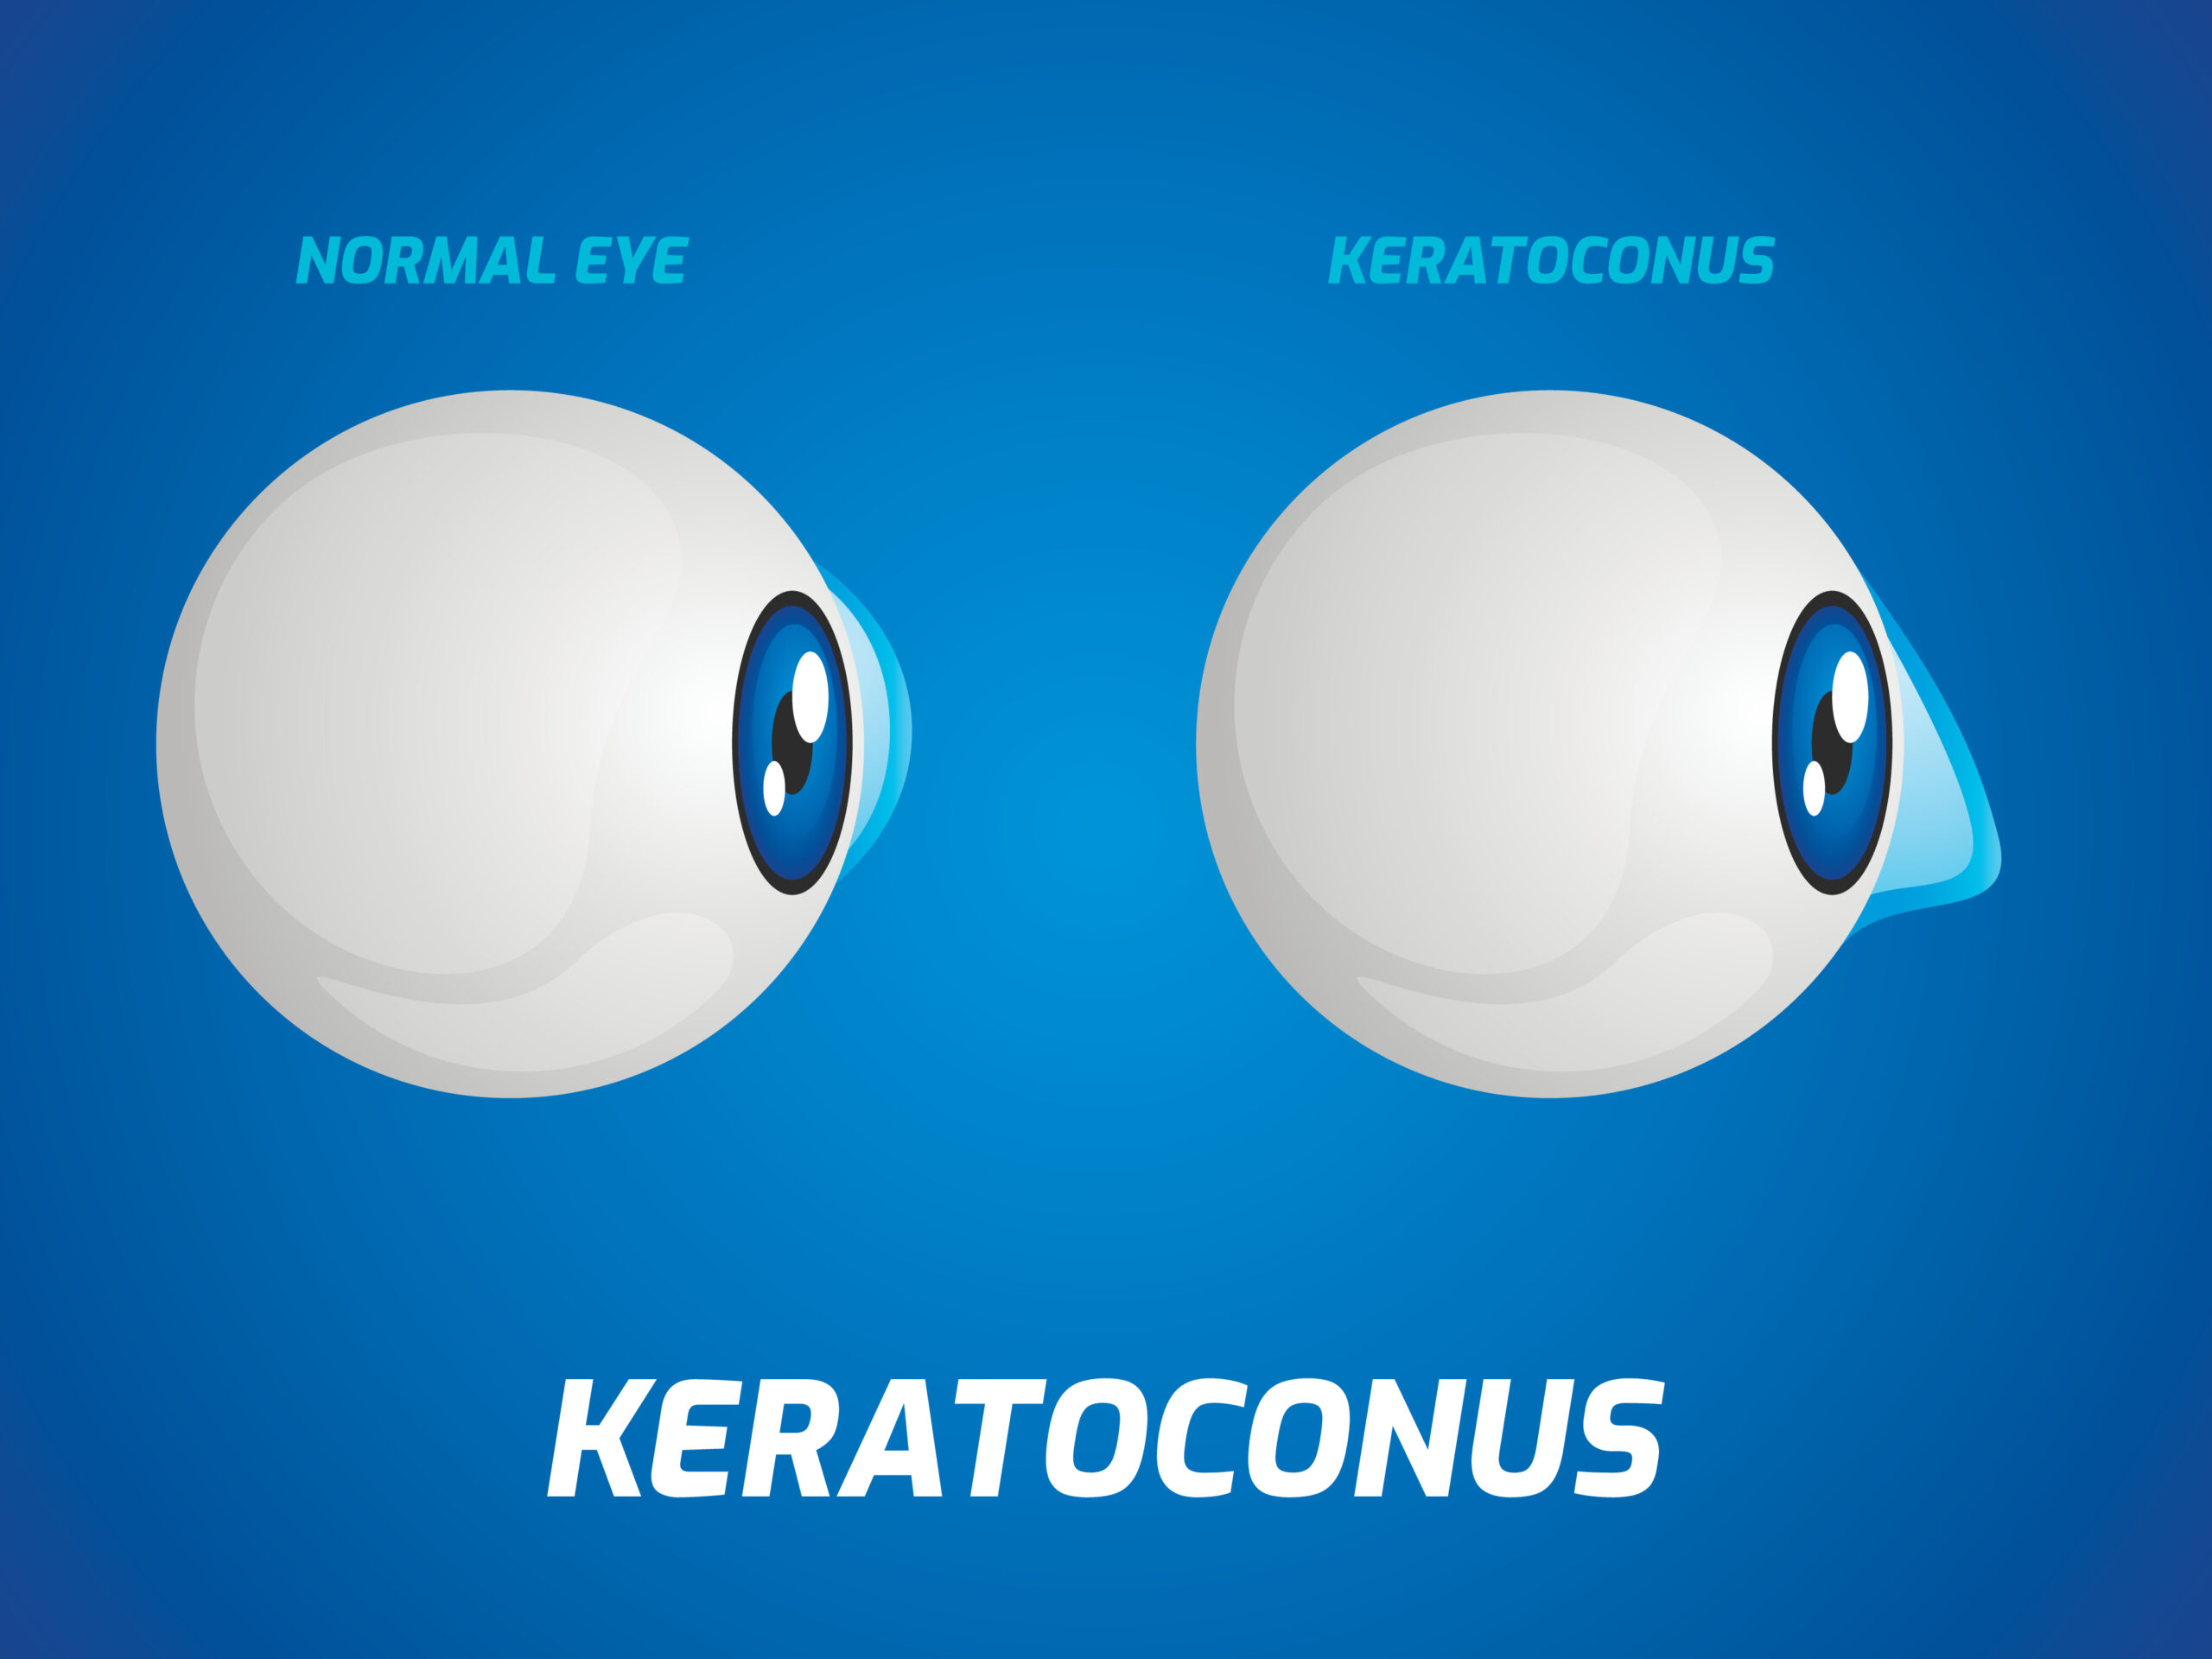 4 Frequent Misconceptions About Keratoconus